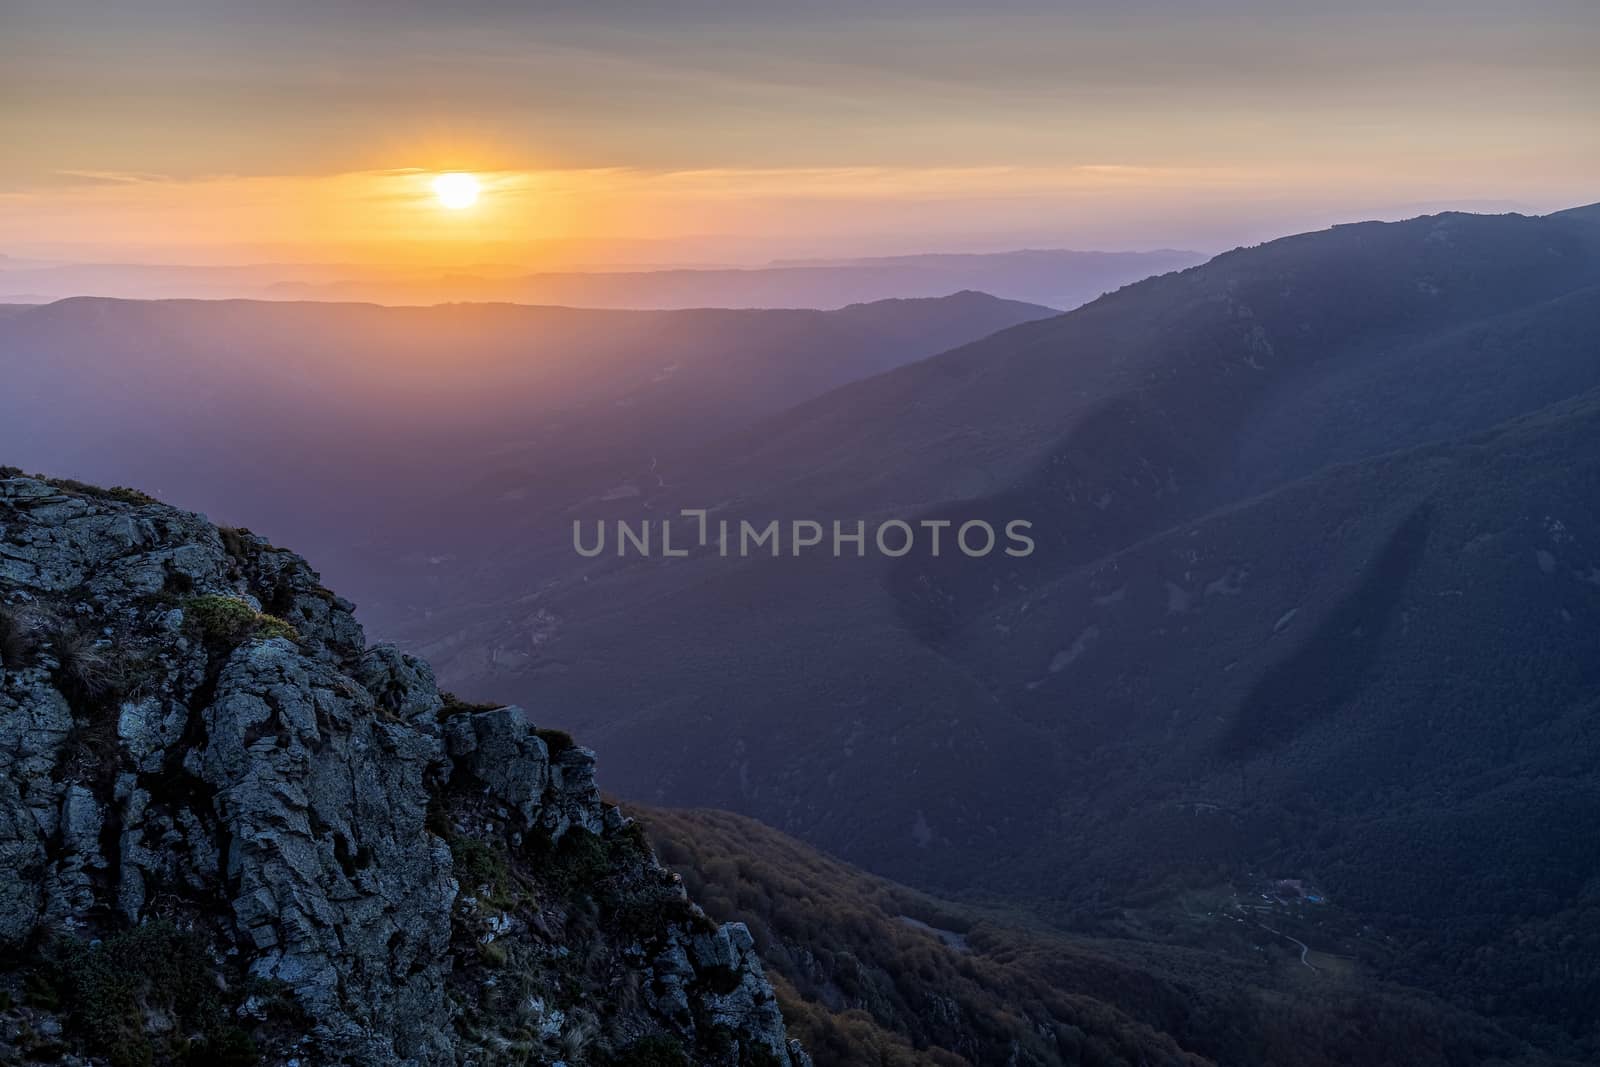 Spanish mountain peaks in Catalonia in sunset light by Digoarpi